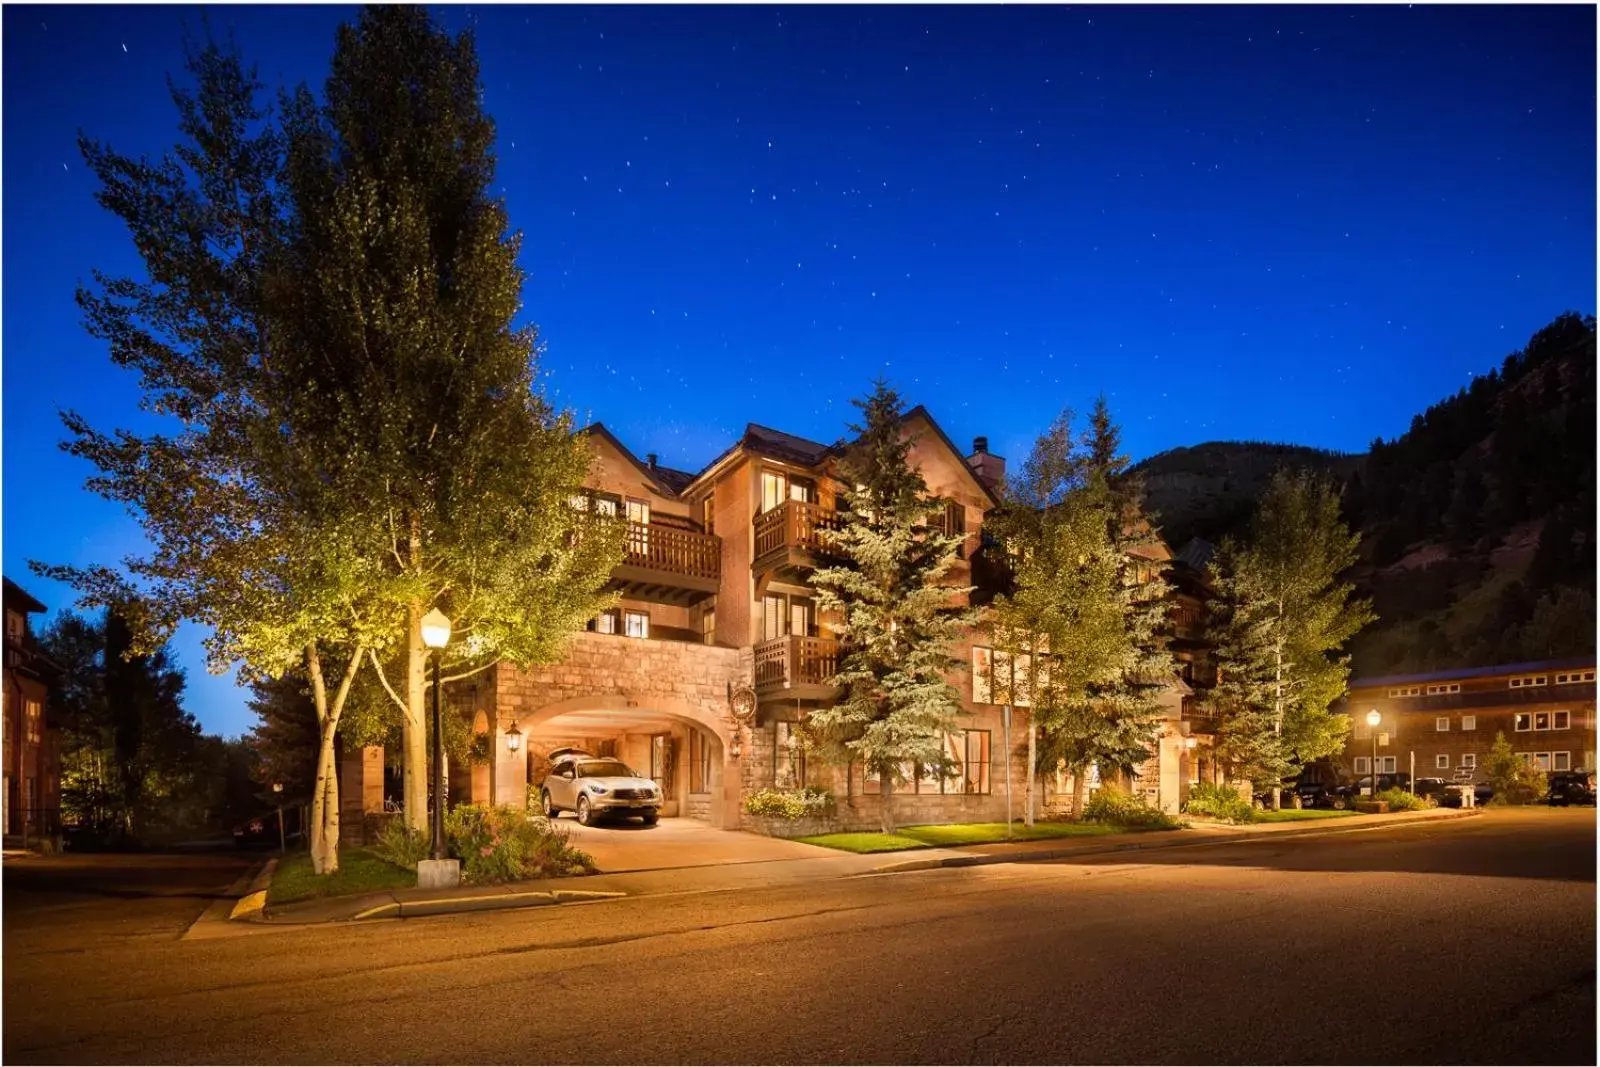 Property Building in The Hotel Telluride